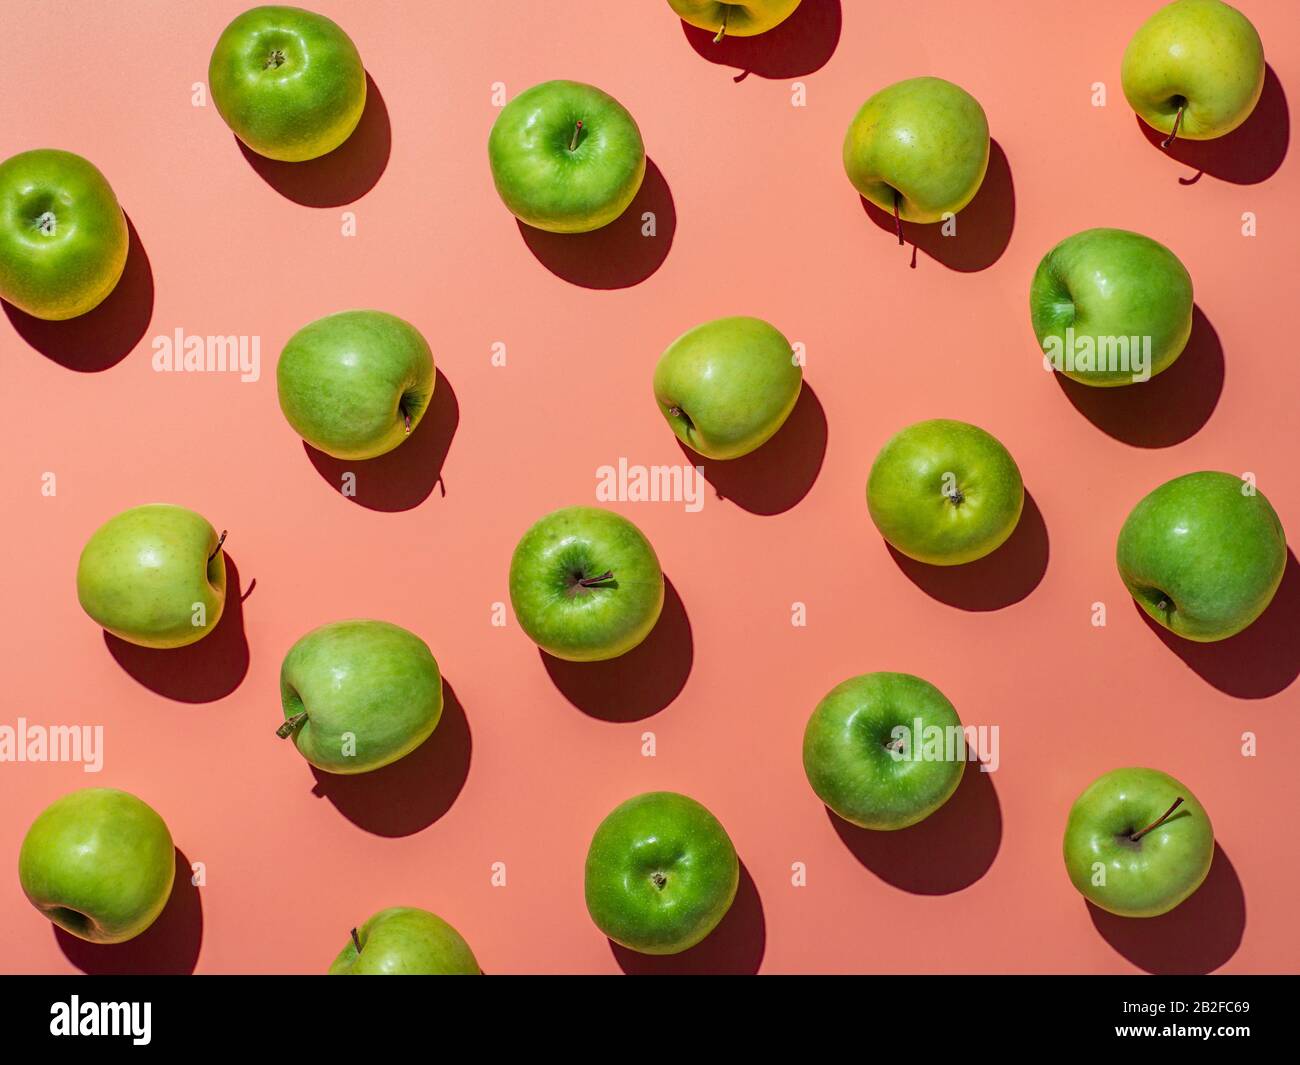 Green apples on orange or coral pink background pattern. Colorful fruit frame. Flat lay or top view, Hard light. Creative concept. Stock Photo